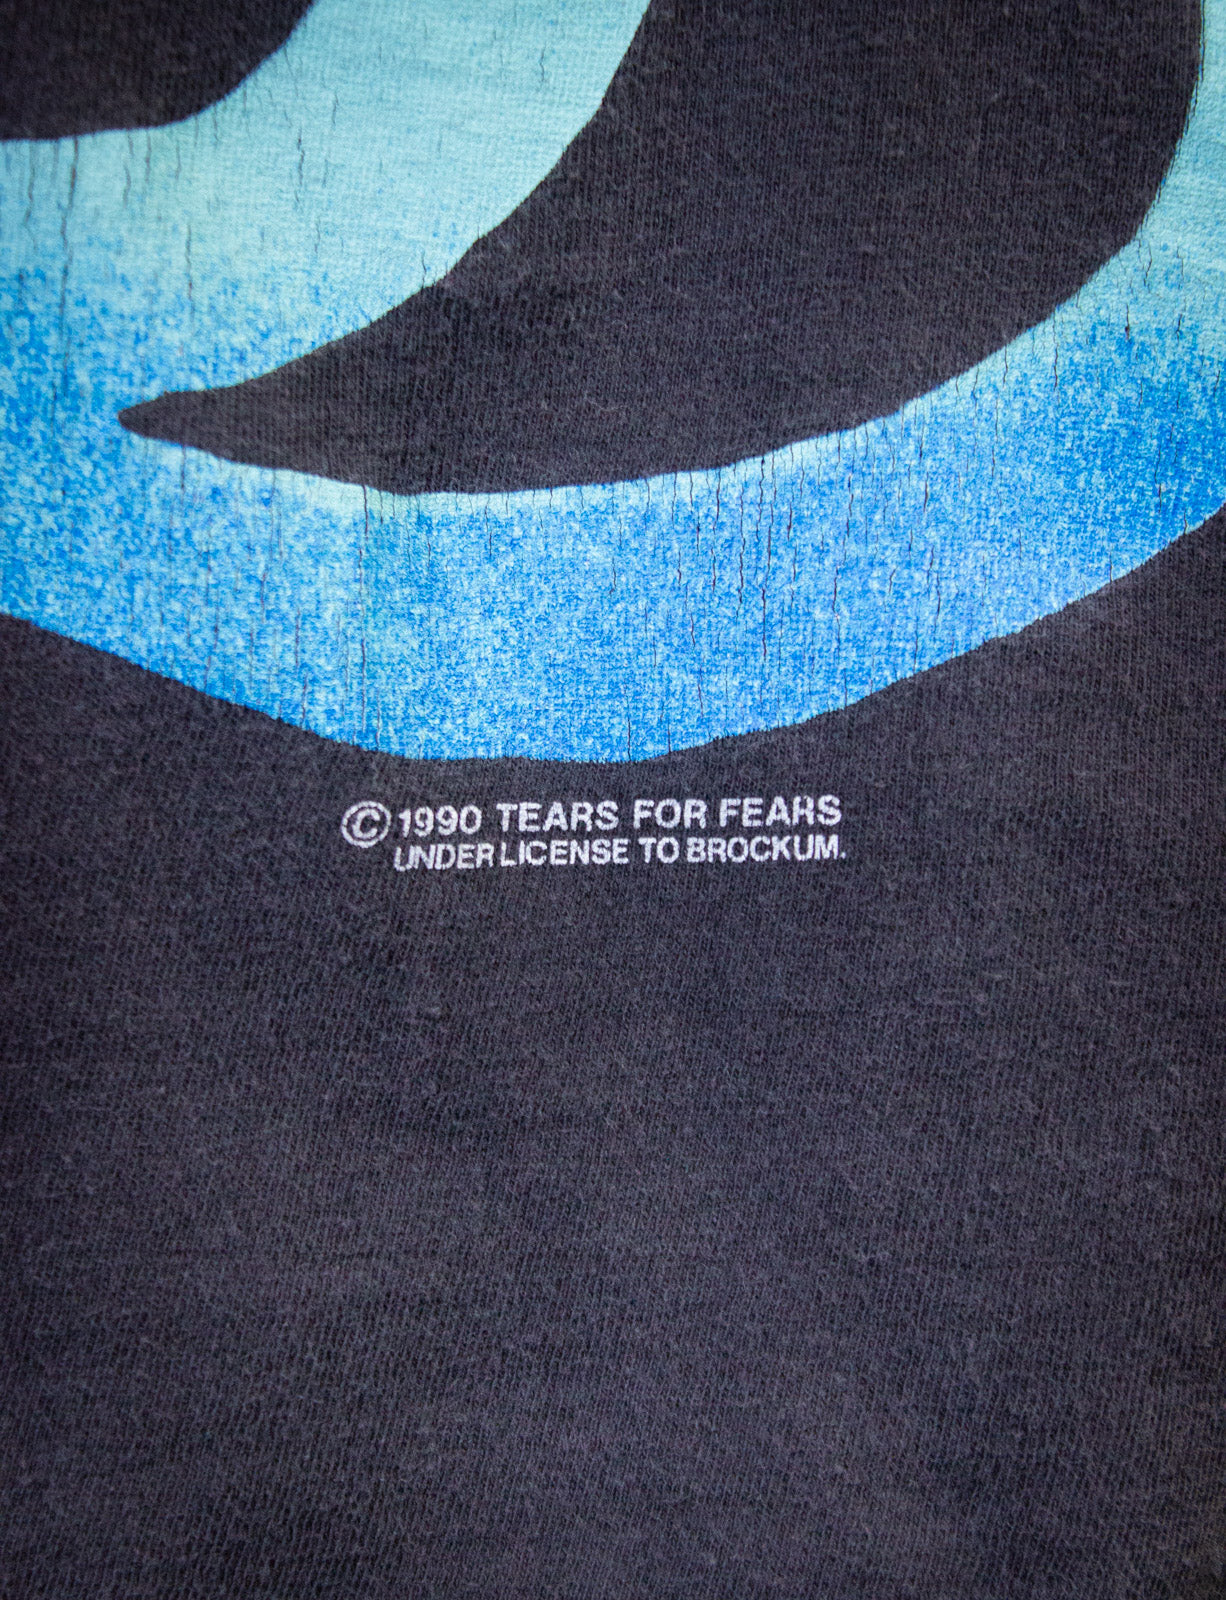 Vintage Tears For Fears The Seeds Of Love Concert T Shirt 1990 XL